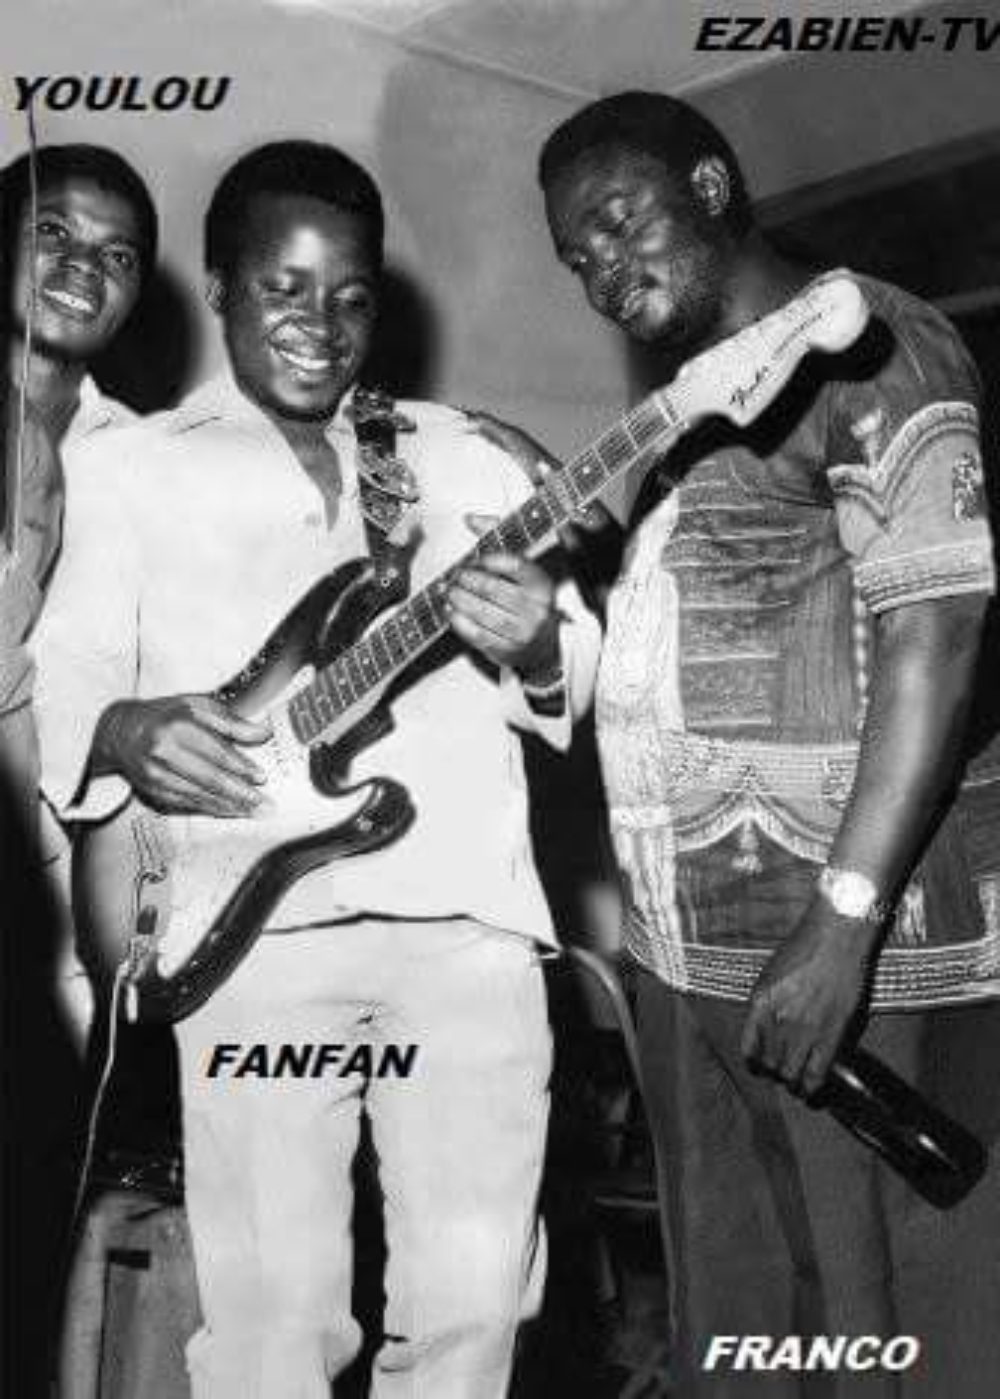 Mose Fan Fan, with Luambo Franco (right), and Youlou Mabiala, left.